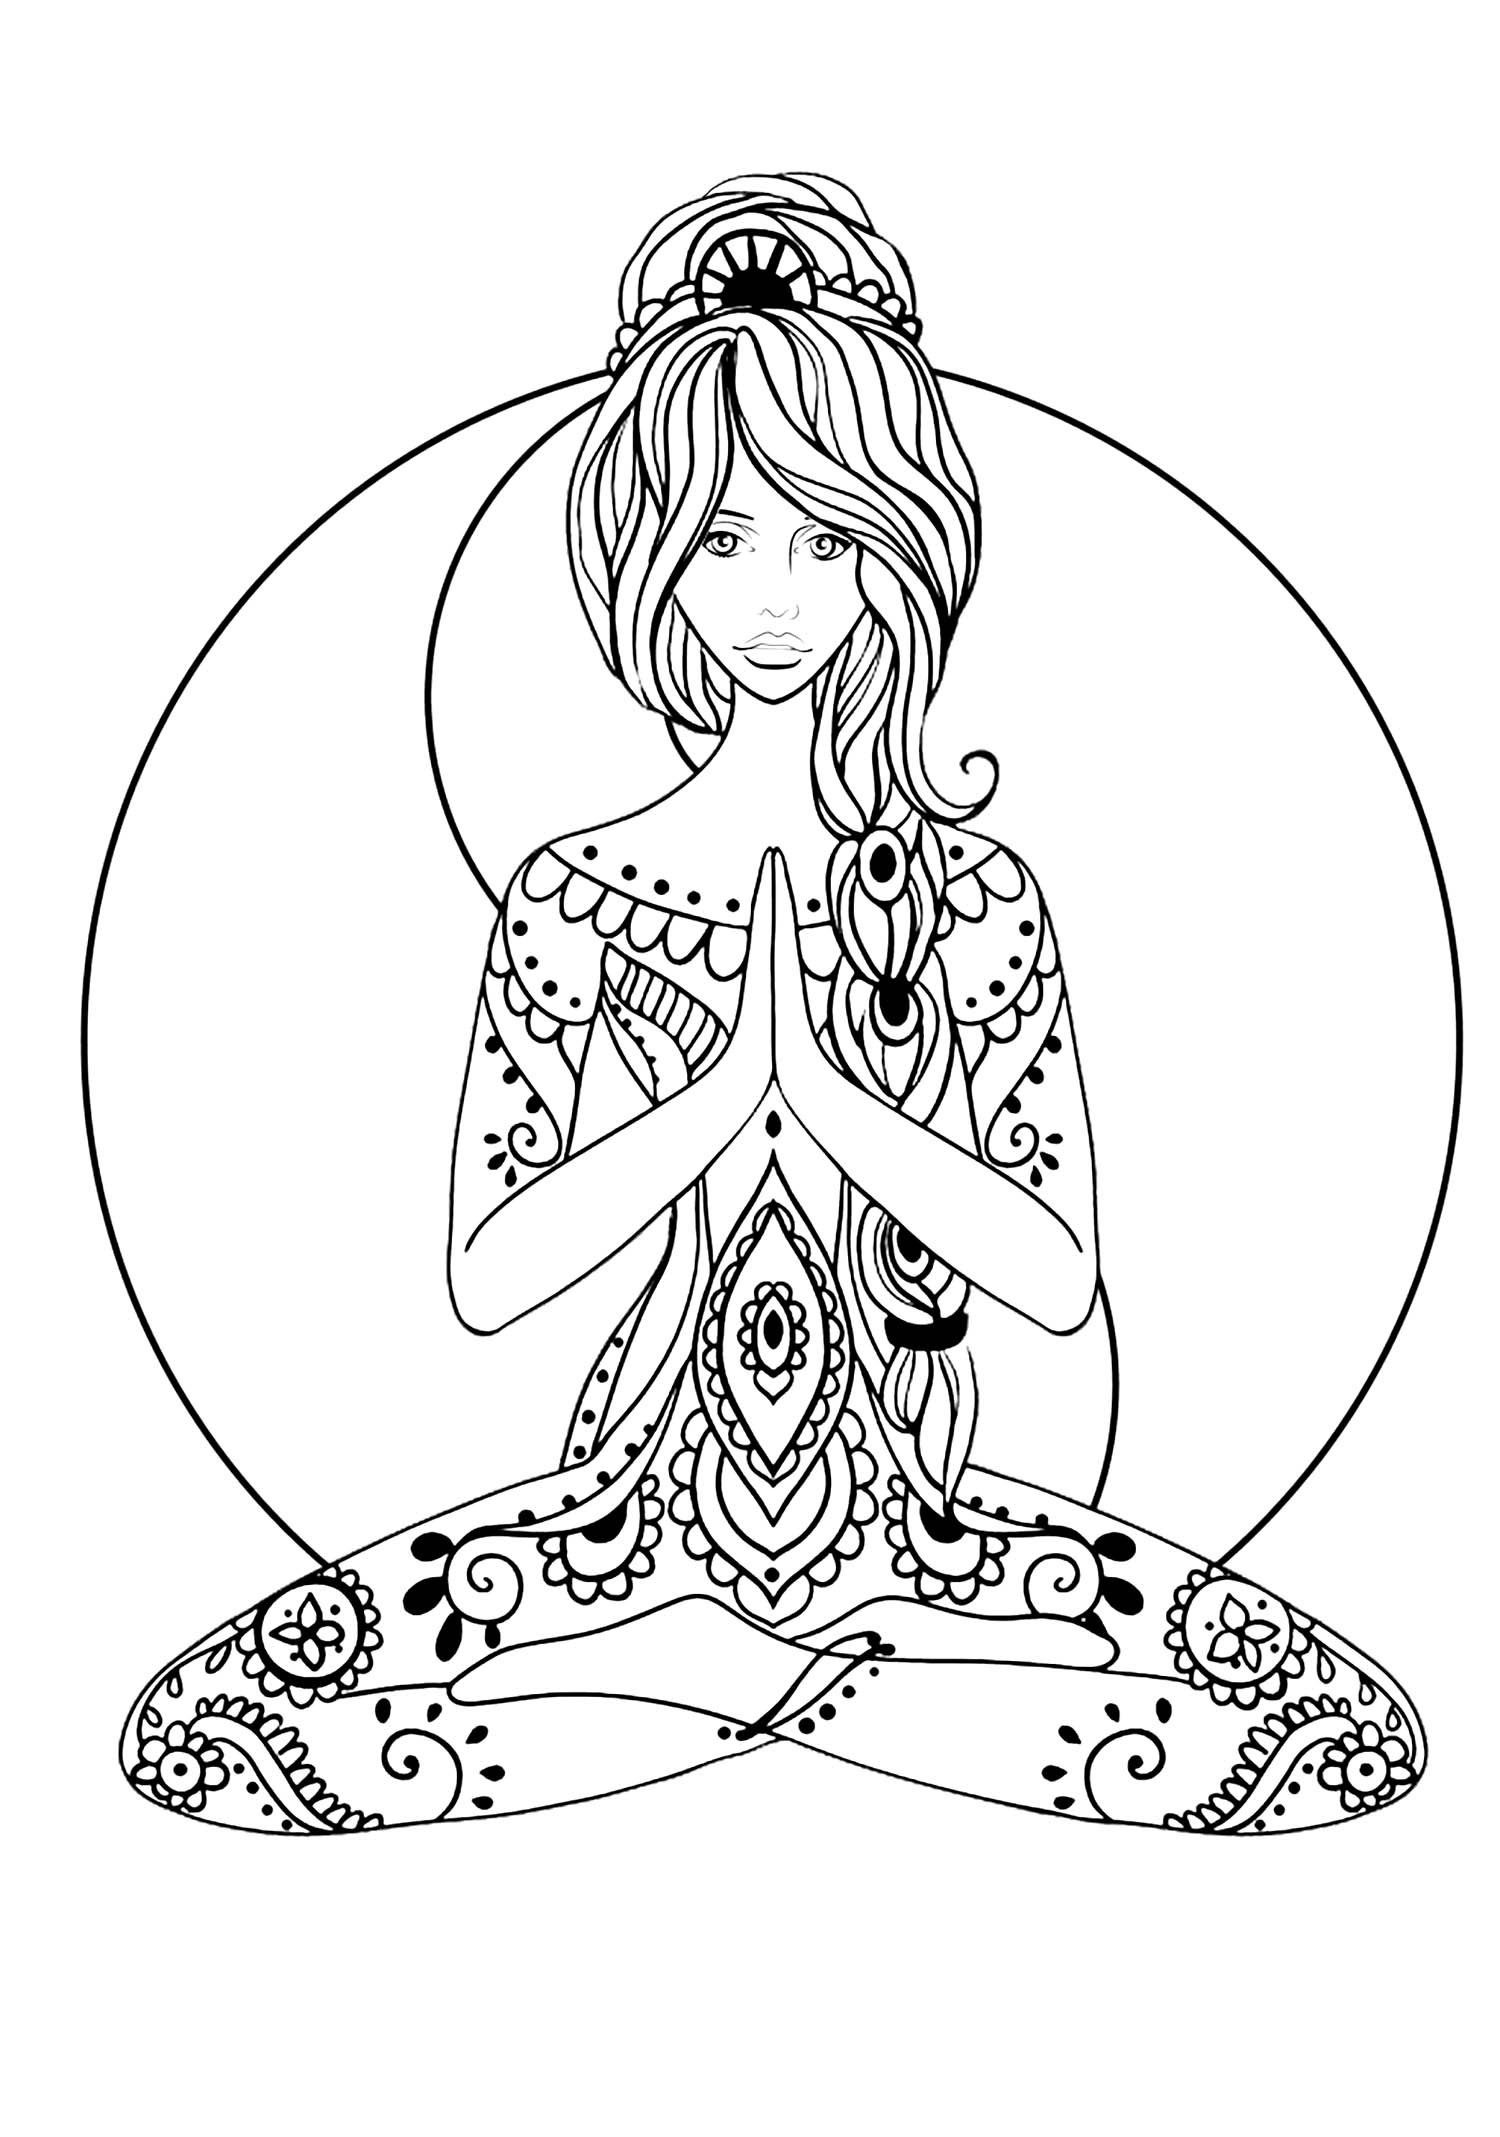 Yoga Anti stress Adult Coloring Pages